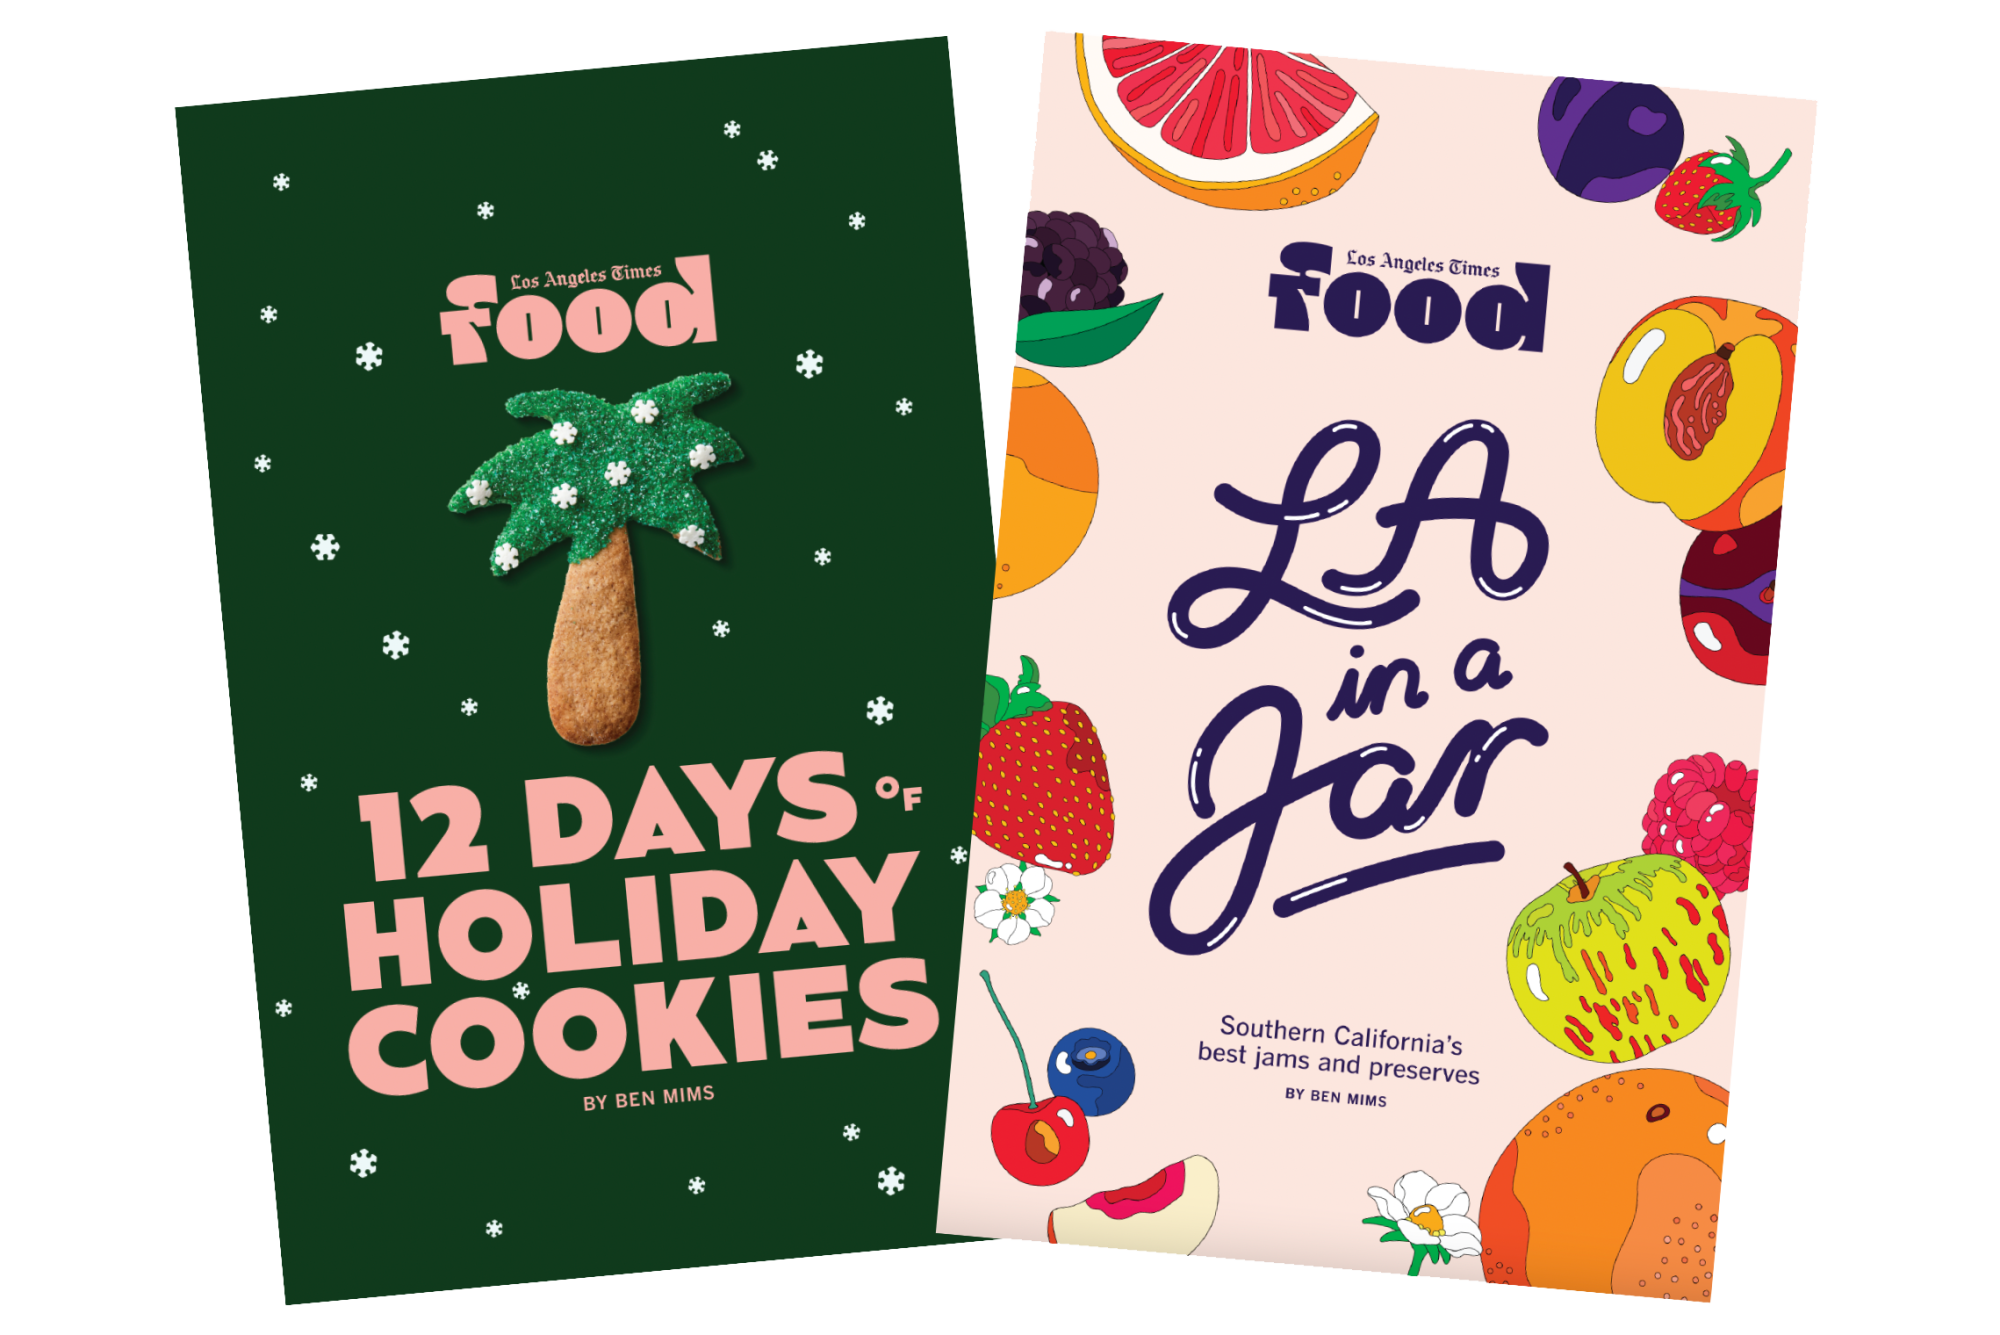 Two L.A. Times Food zines: "12 Days of Holiday Cookies" and "L.A. in a Jar"